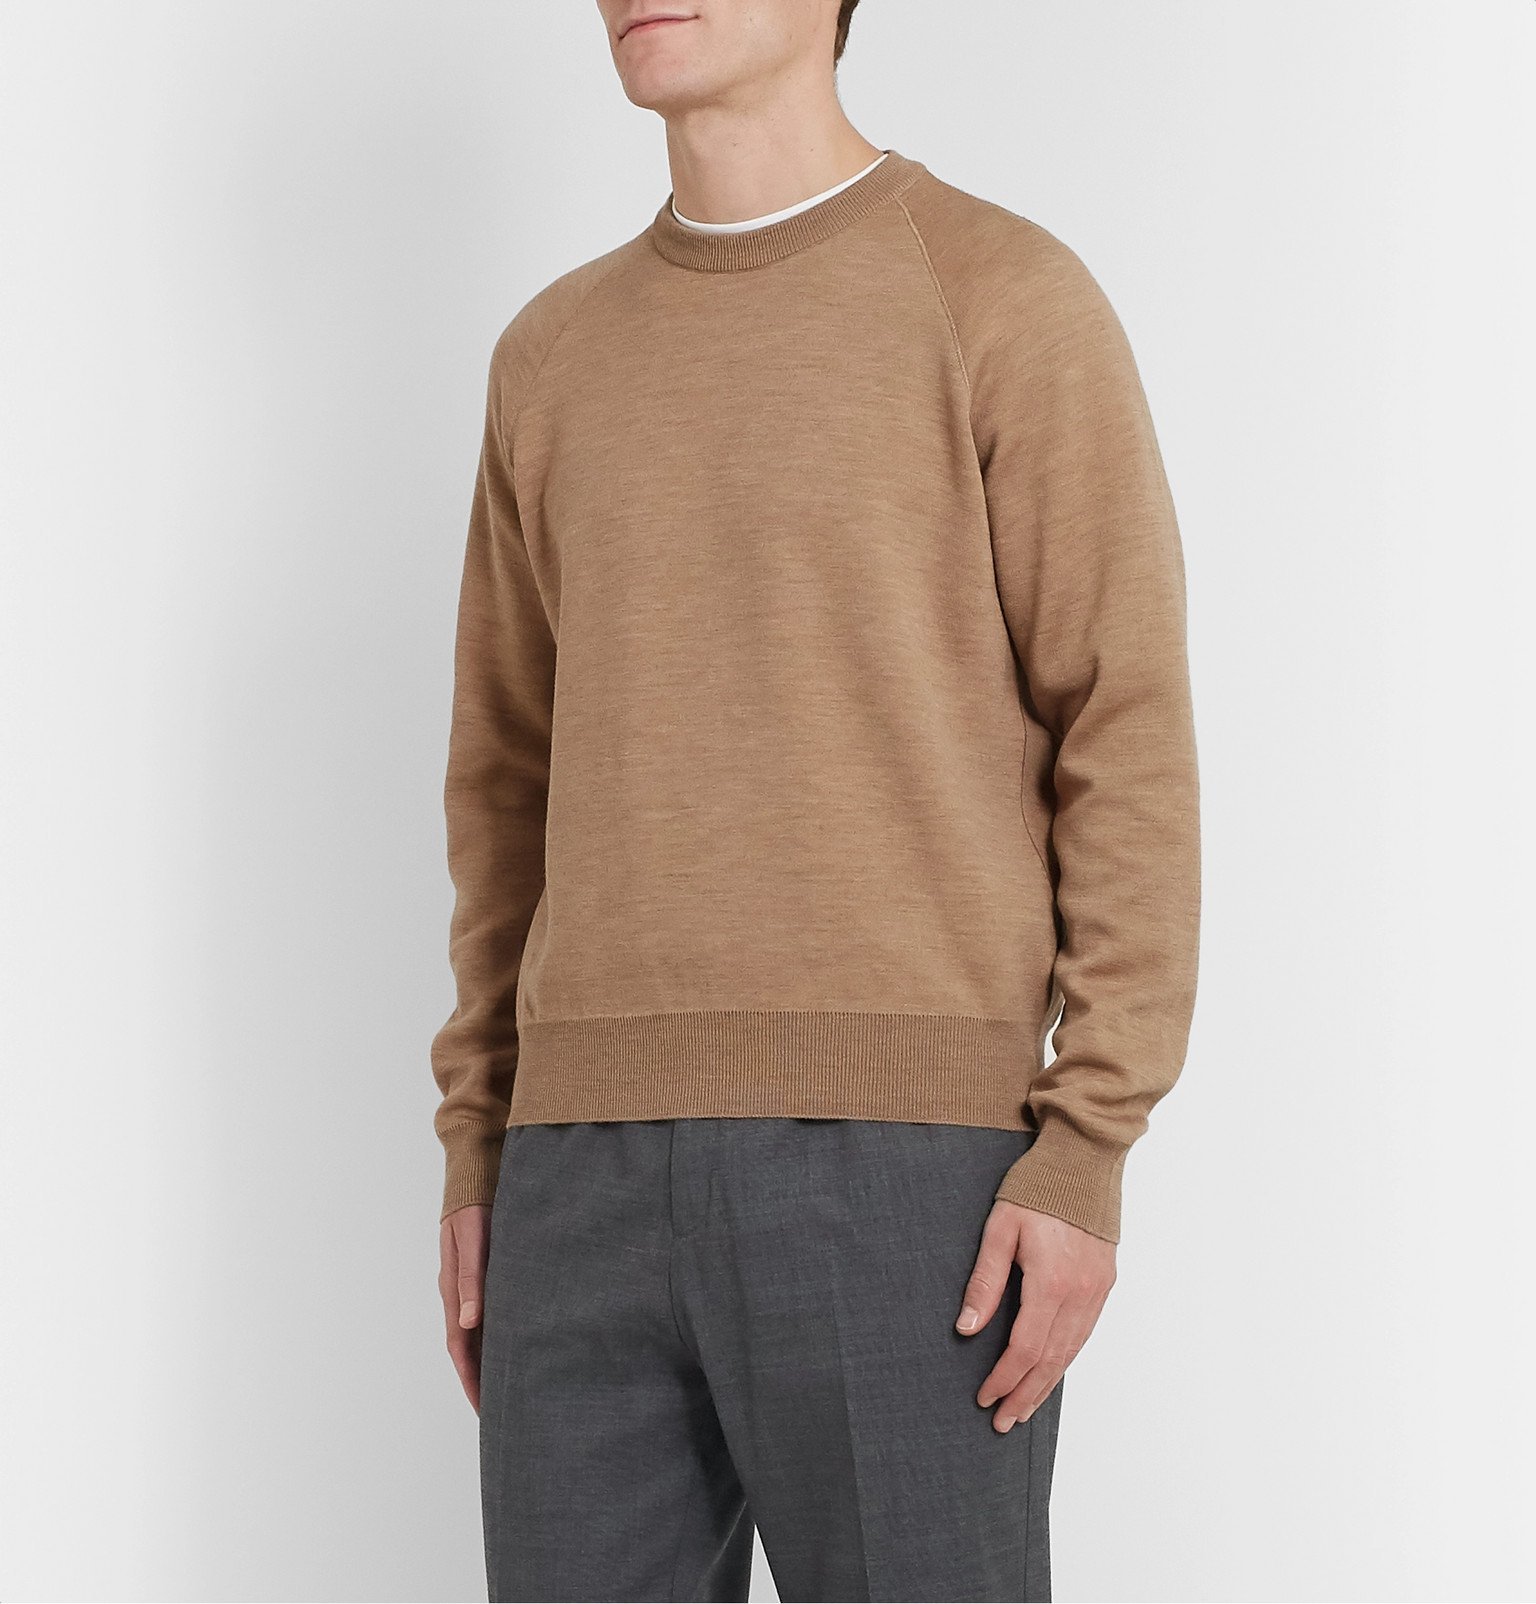 Mr P. - Knitted Sweater - Brown Mr P.